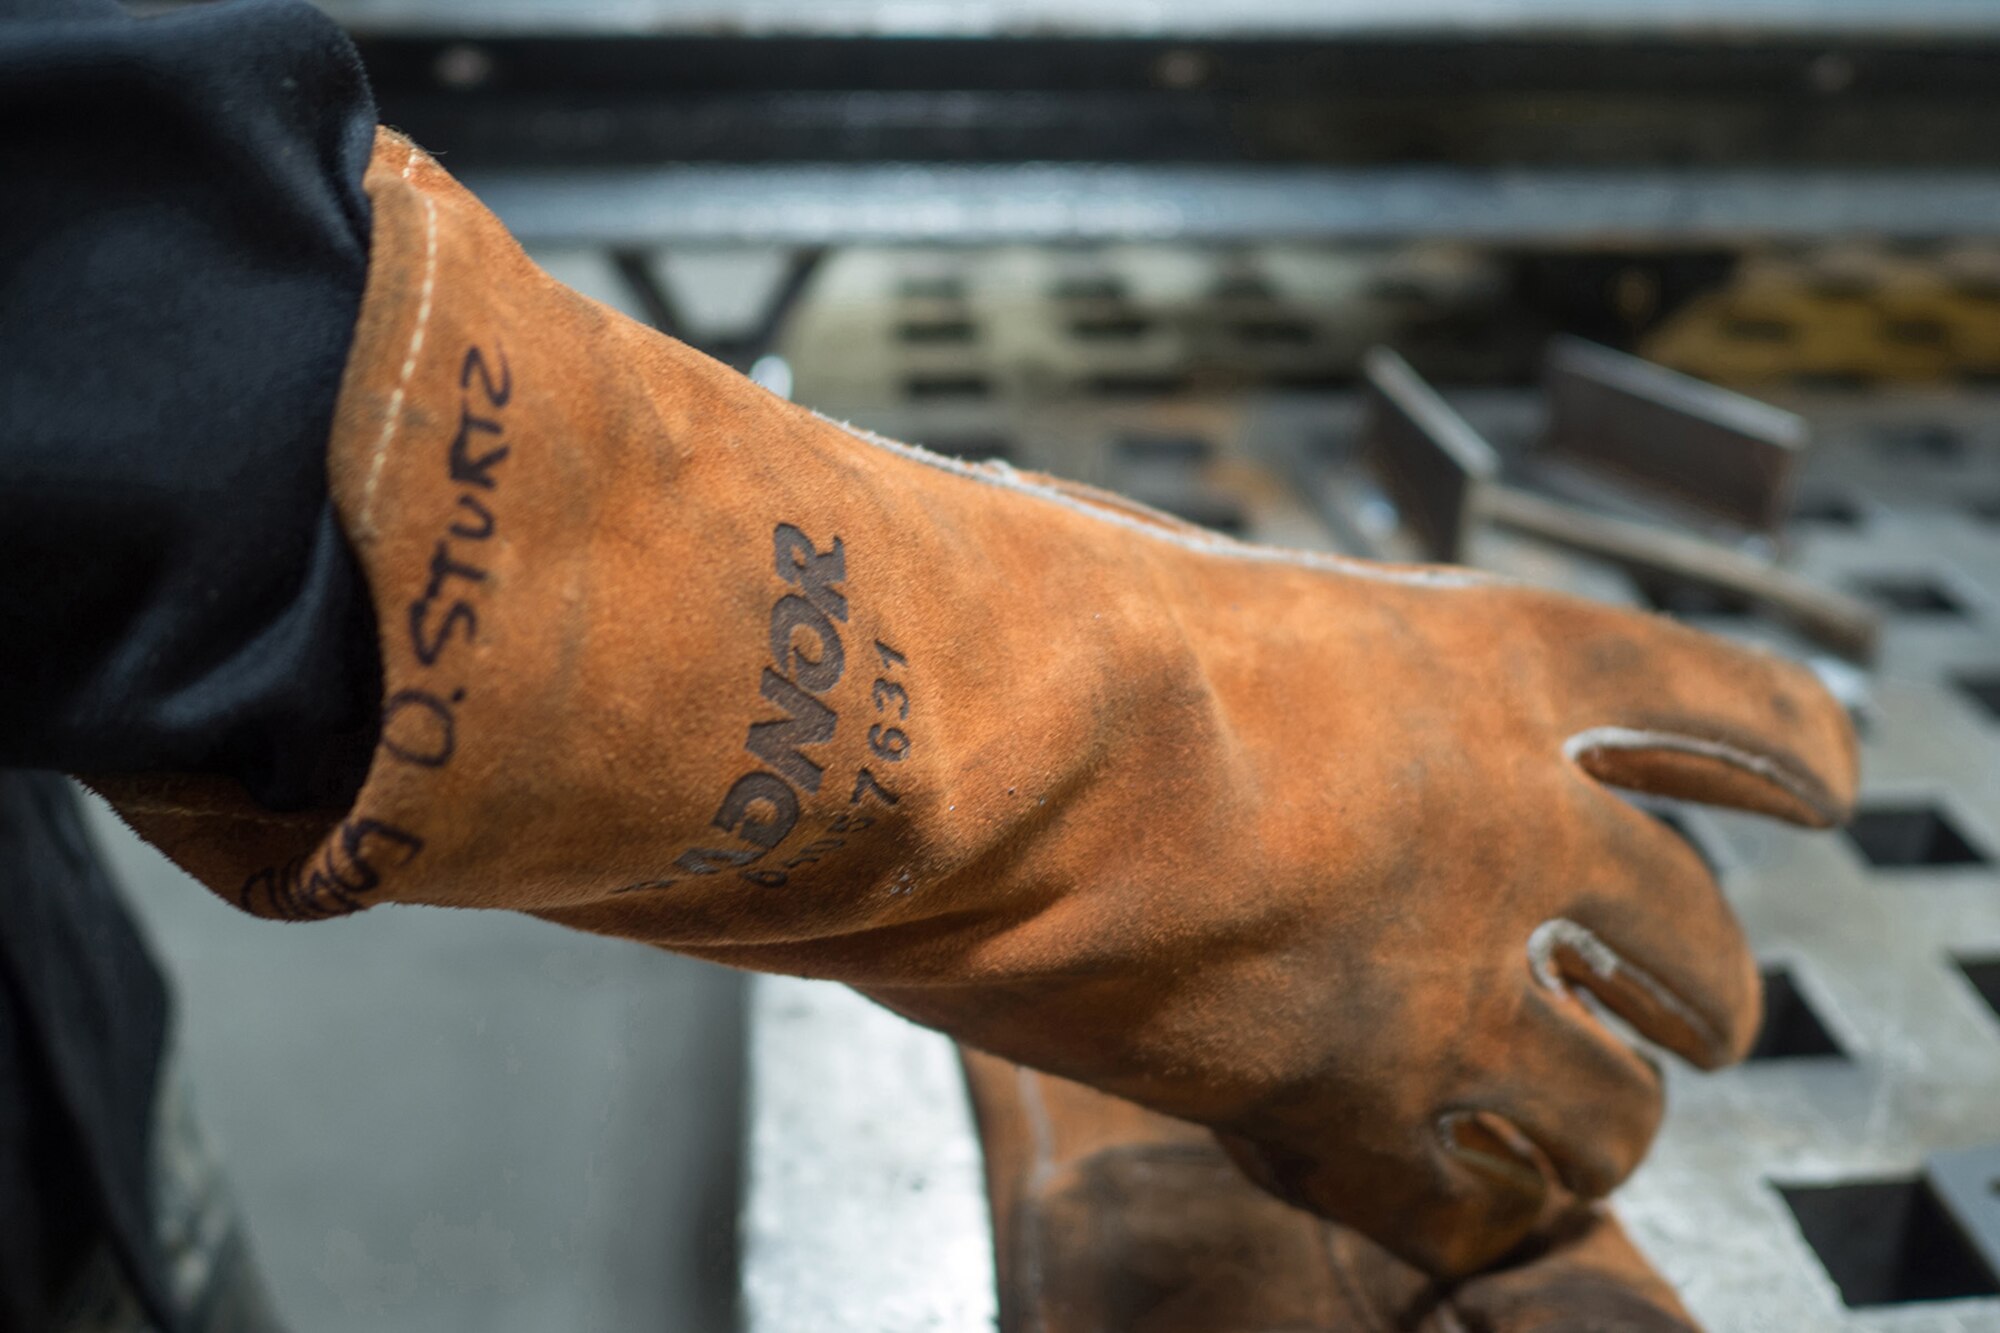 Airman Dalton Sturtz, a native of Seguin, Texas, an aircraft metals technology journeyman assigned to the 3rd Maintenance Squadron, takes off his protective gloves after welding a metal plate in the metals fabrication shop on Joint Base Elmendorf-Richardson, Alaska, May 9, 2018. Aircraft Metals Technology Airmen measure broken or worn parts, draw working sketches, make templates, perform precision grinding remove poisonous or corrosive deposits from parts, and write programs for machines using manual and computer-aided manufacturing.